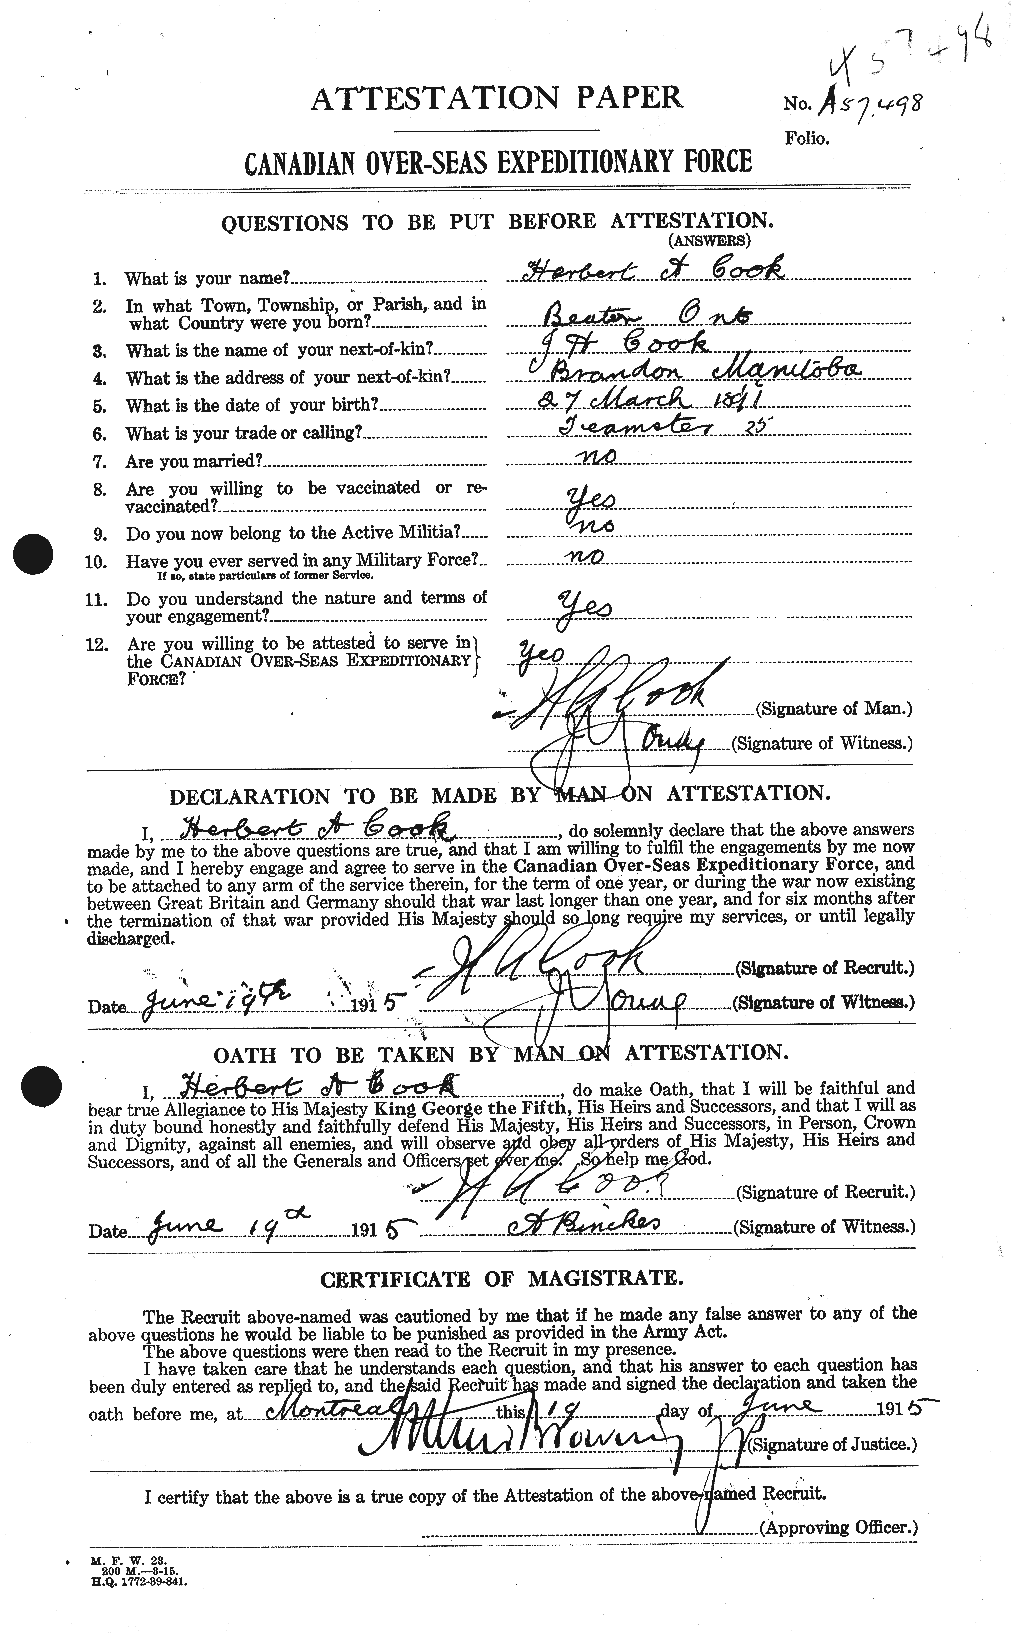 Personnel Records of the First World War - CEF 073718a